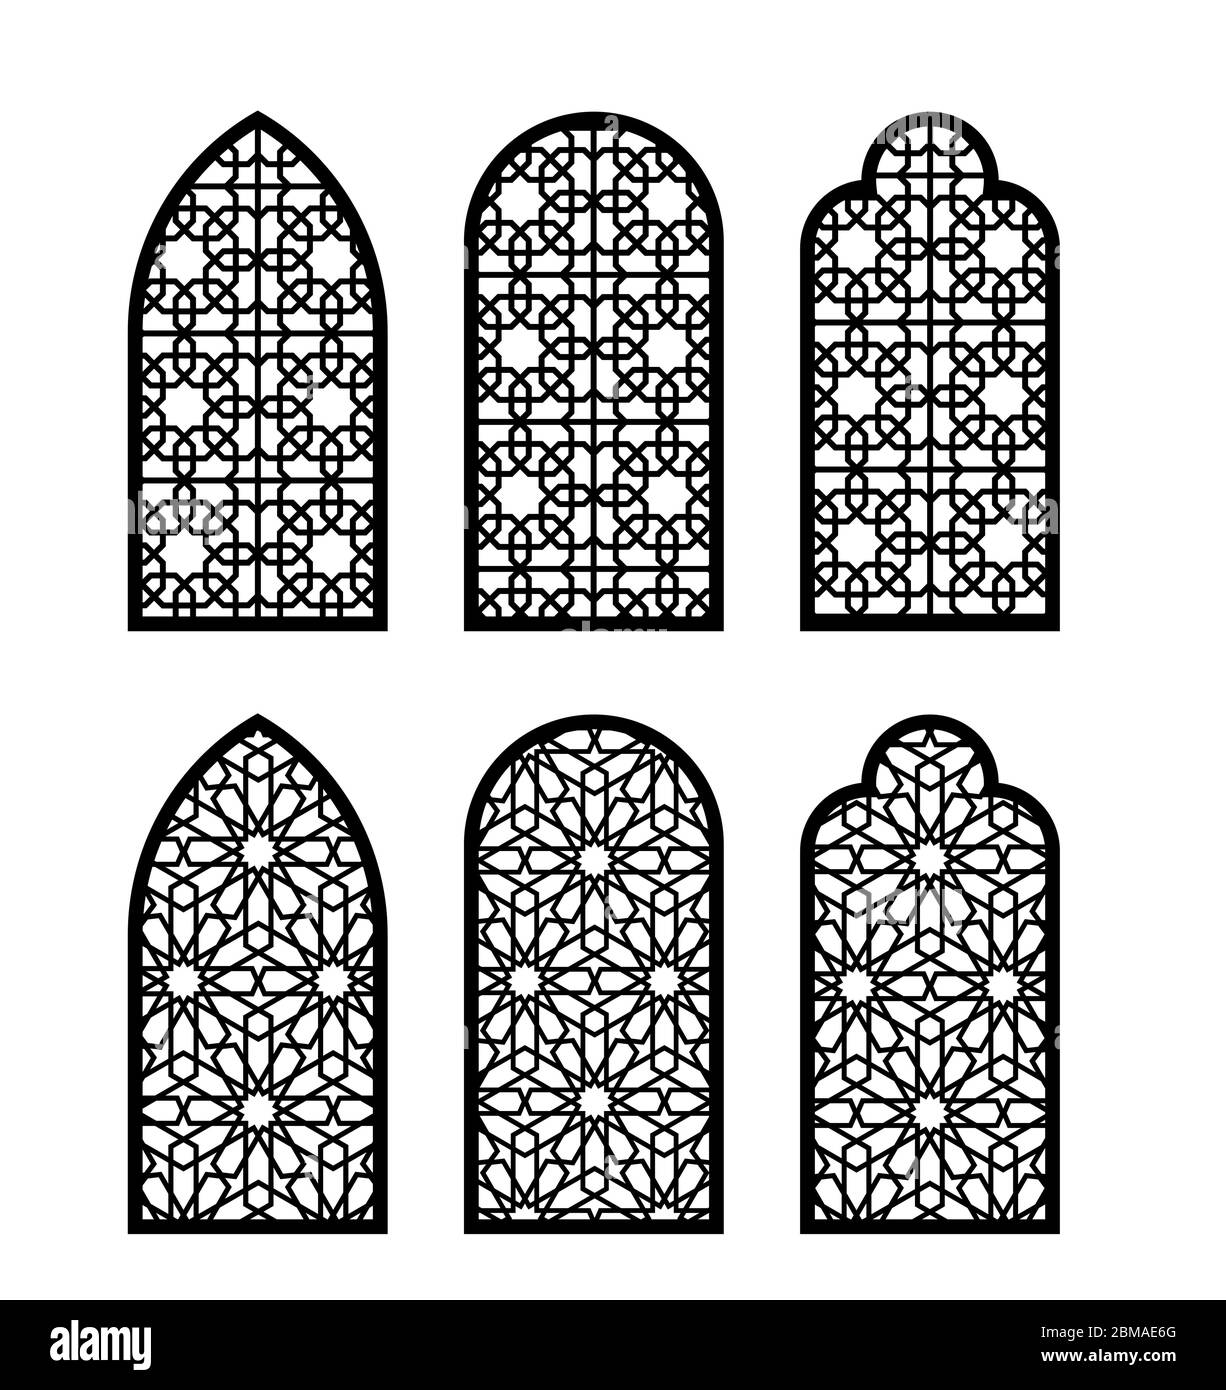 Arabesque arch window or door set. Cnc pattern, laser cutting, vector template set for wall decor, hanging, stencil, engraving Stock Vector